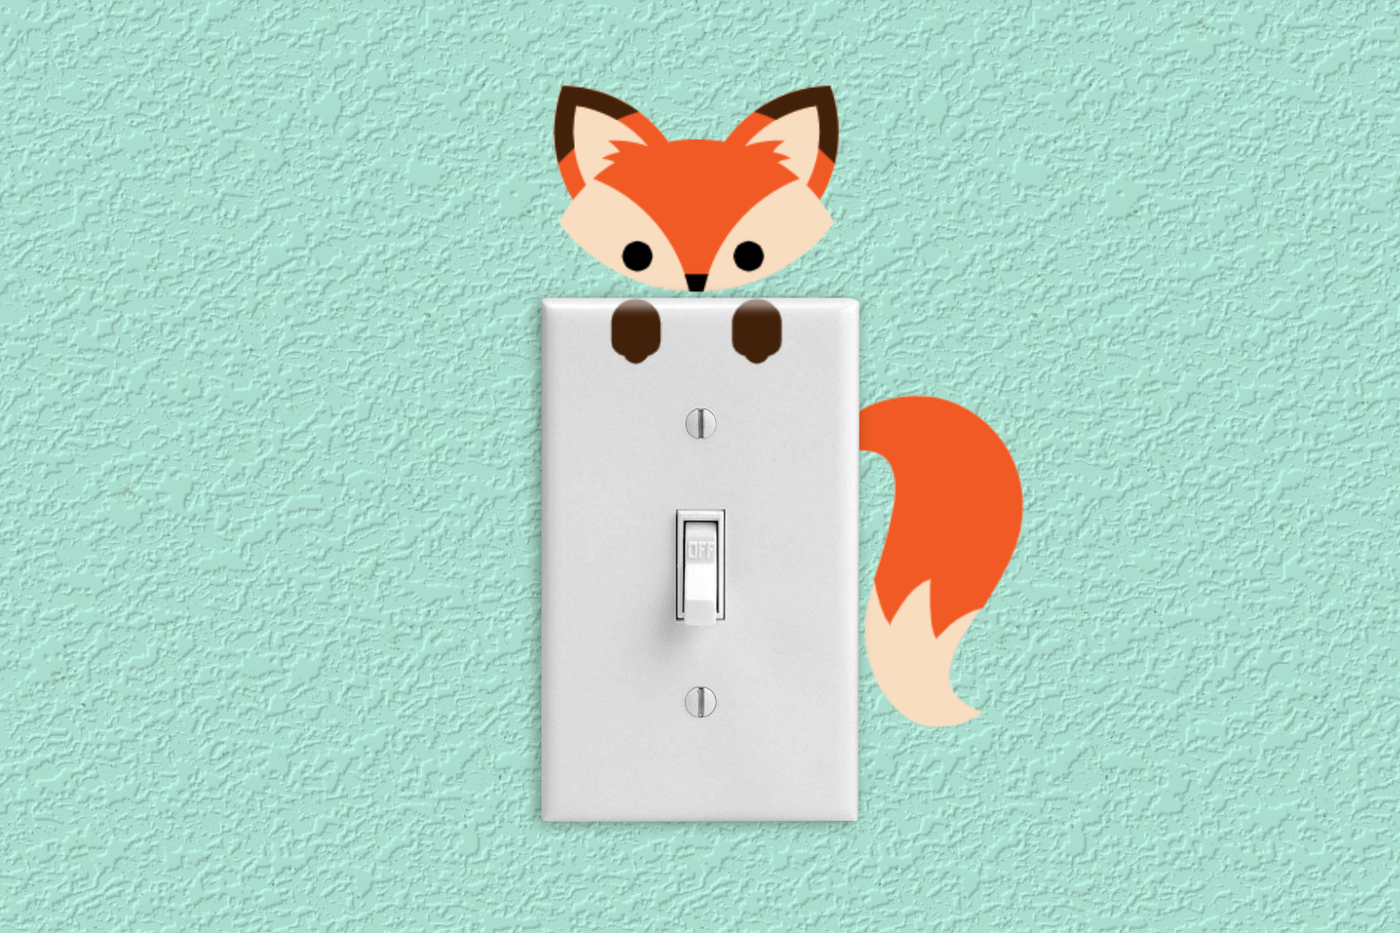 A light switch decorated with a fox peeking out from around it.